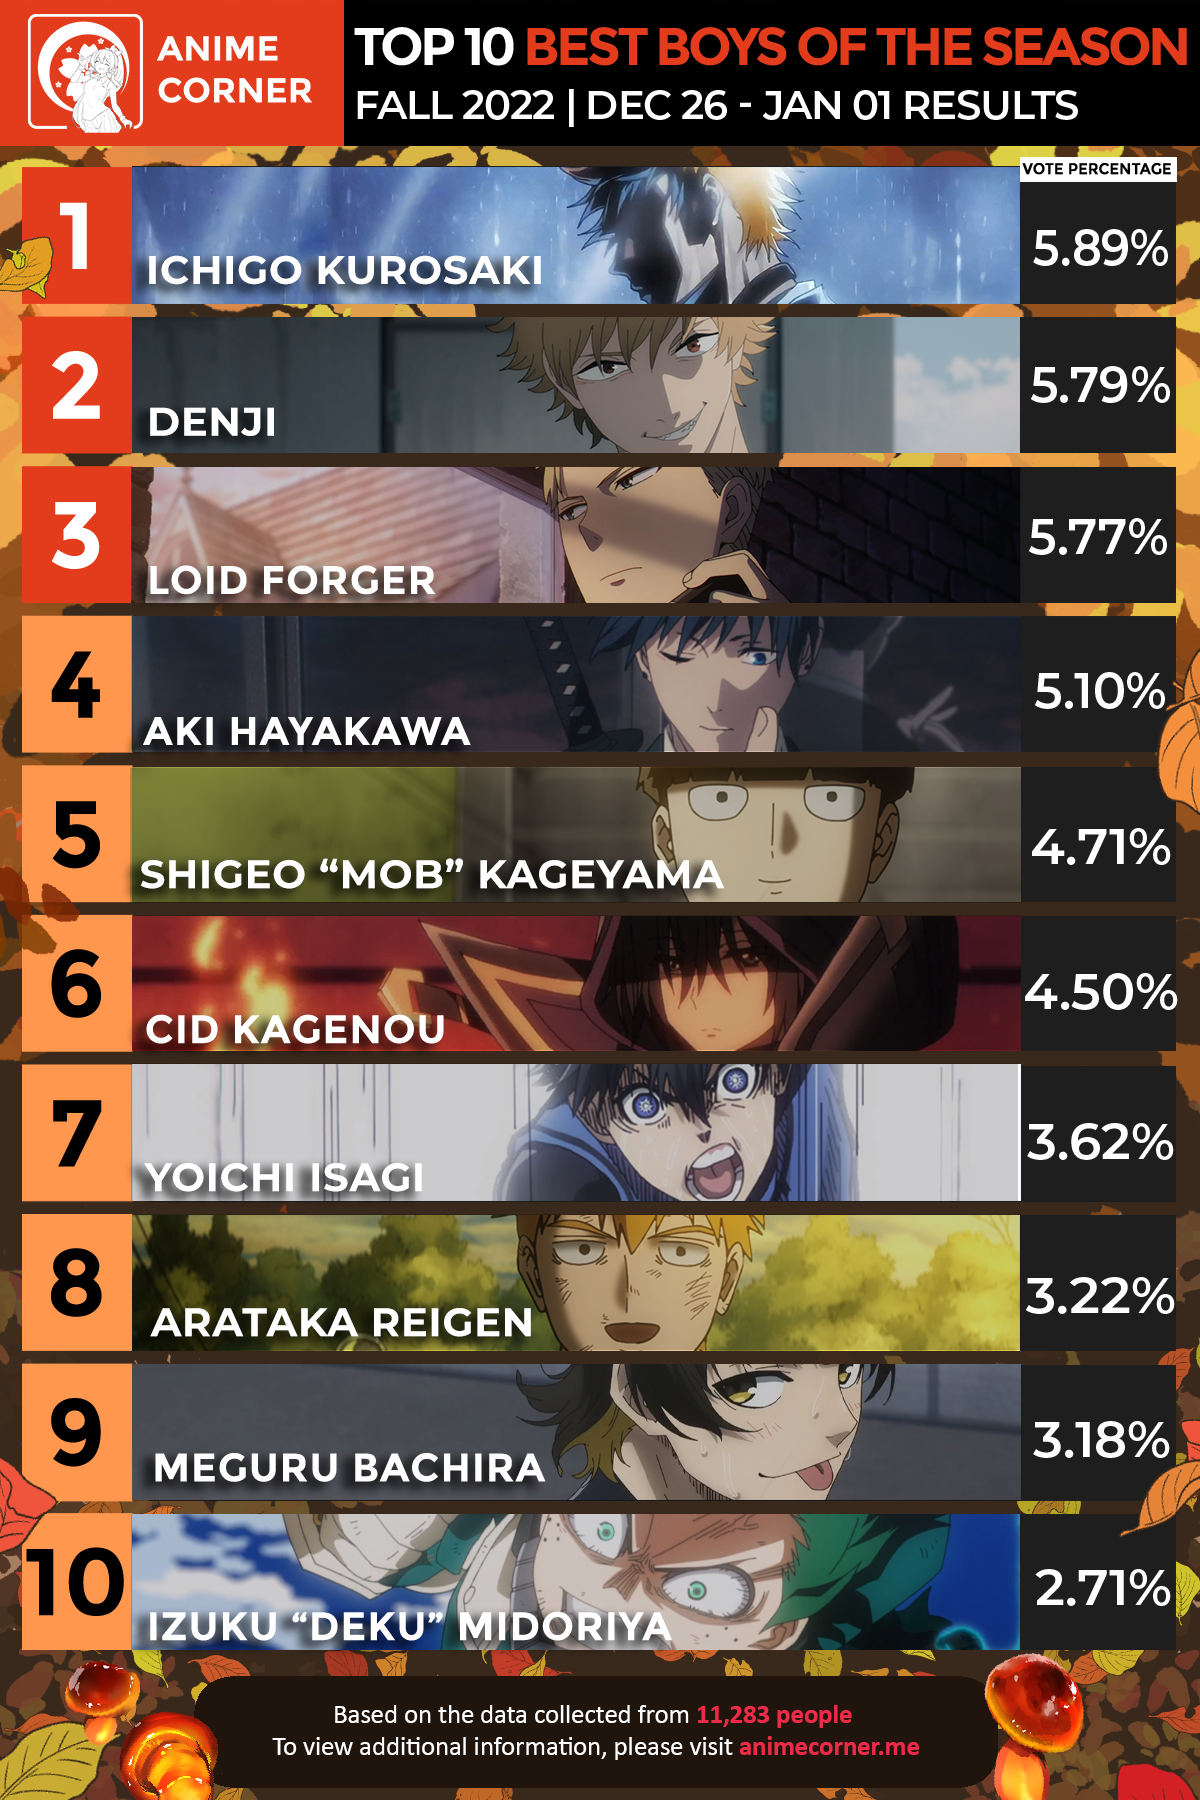 The 7 Most Popular Anime Series that Everyone Is Watching